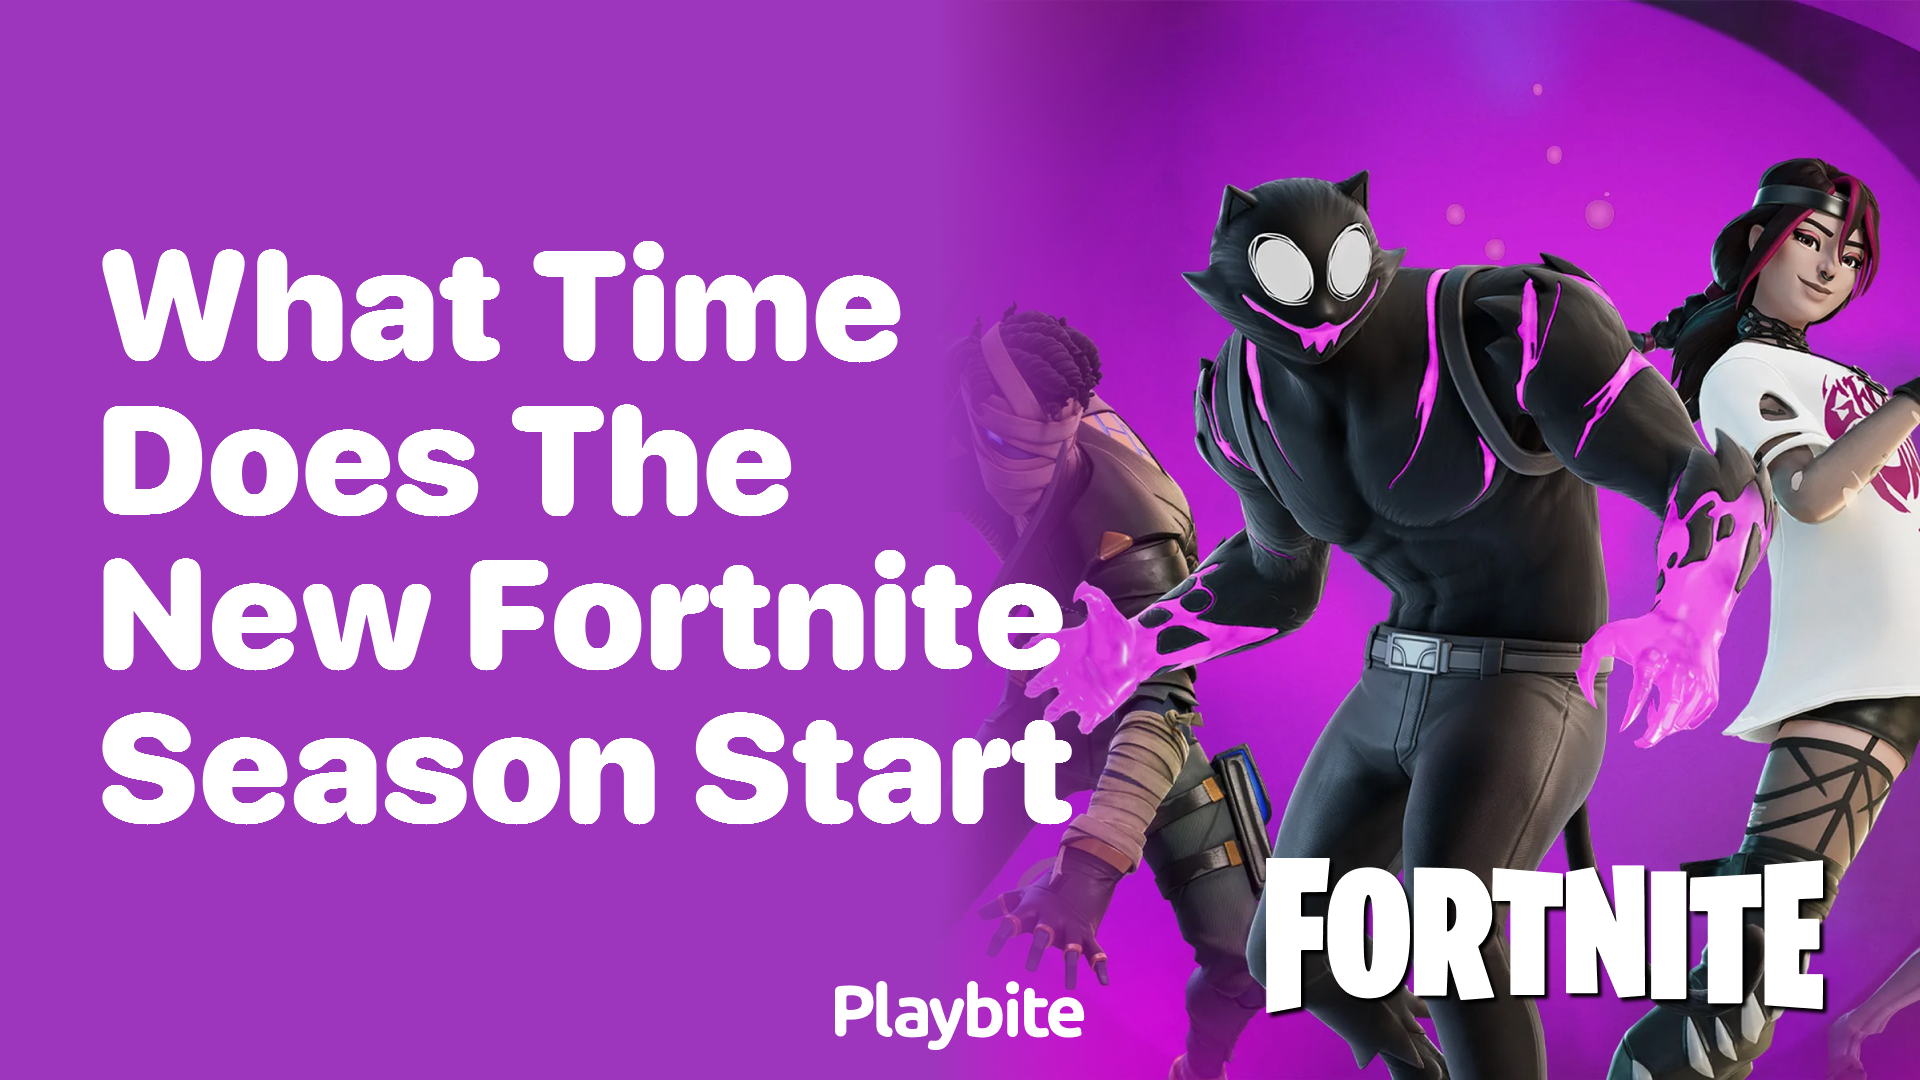 What Time Does the New Fortnite Season Start? Find Out Here!